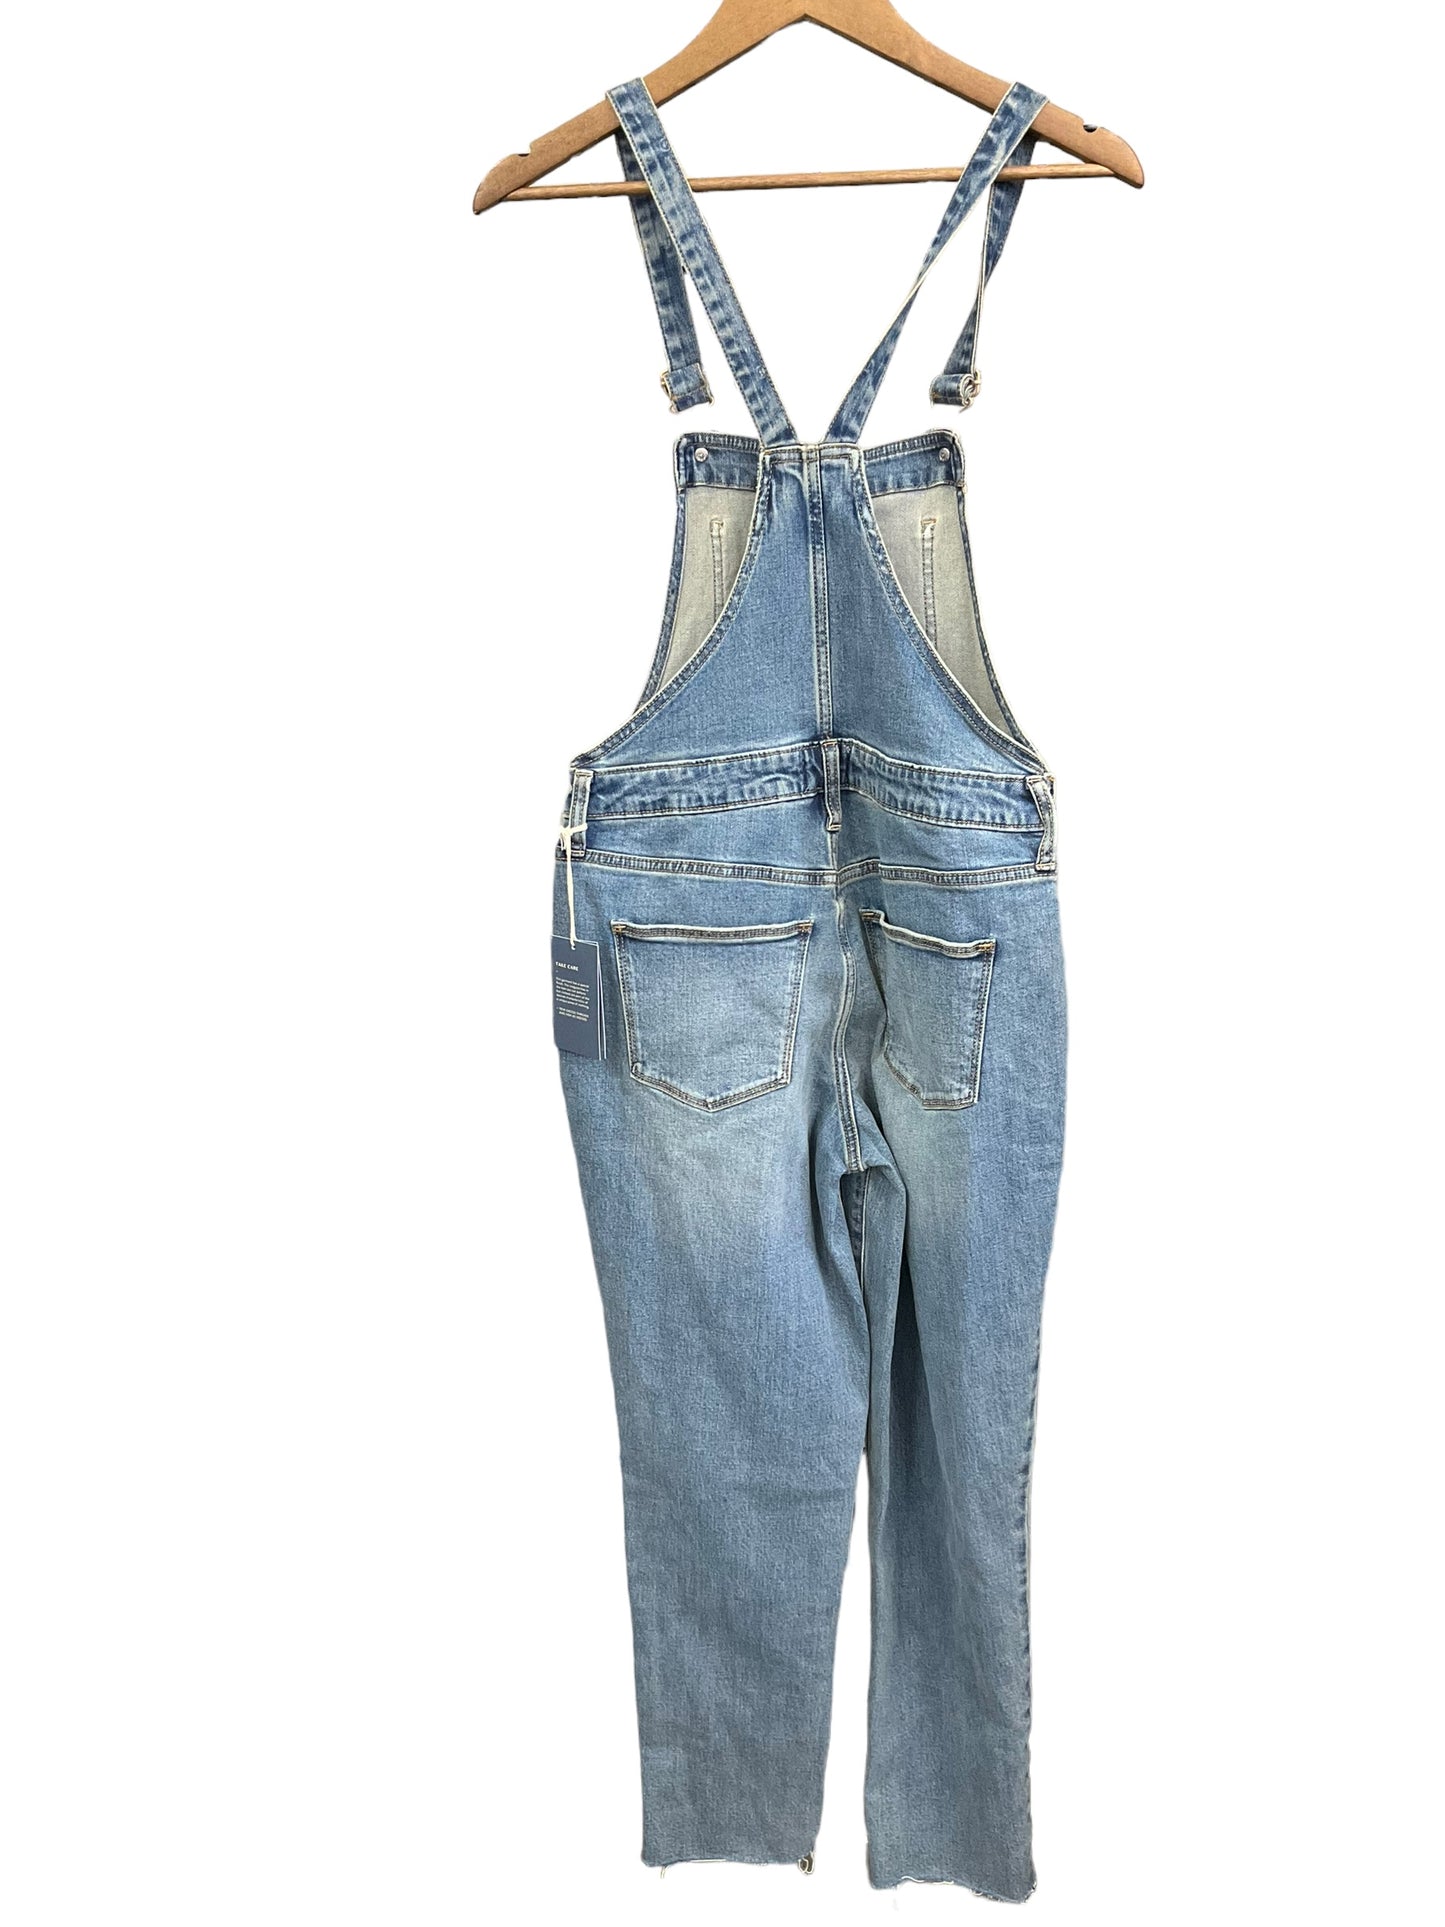 Overalls By Universal Thread  Size: 4